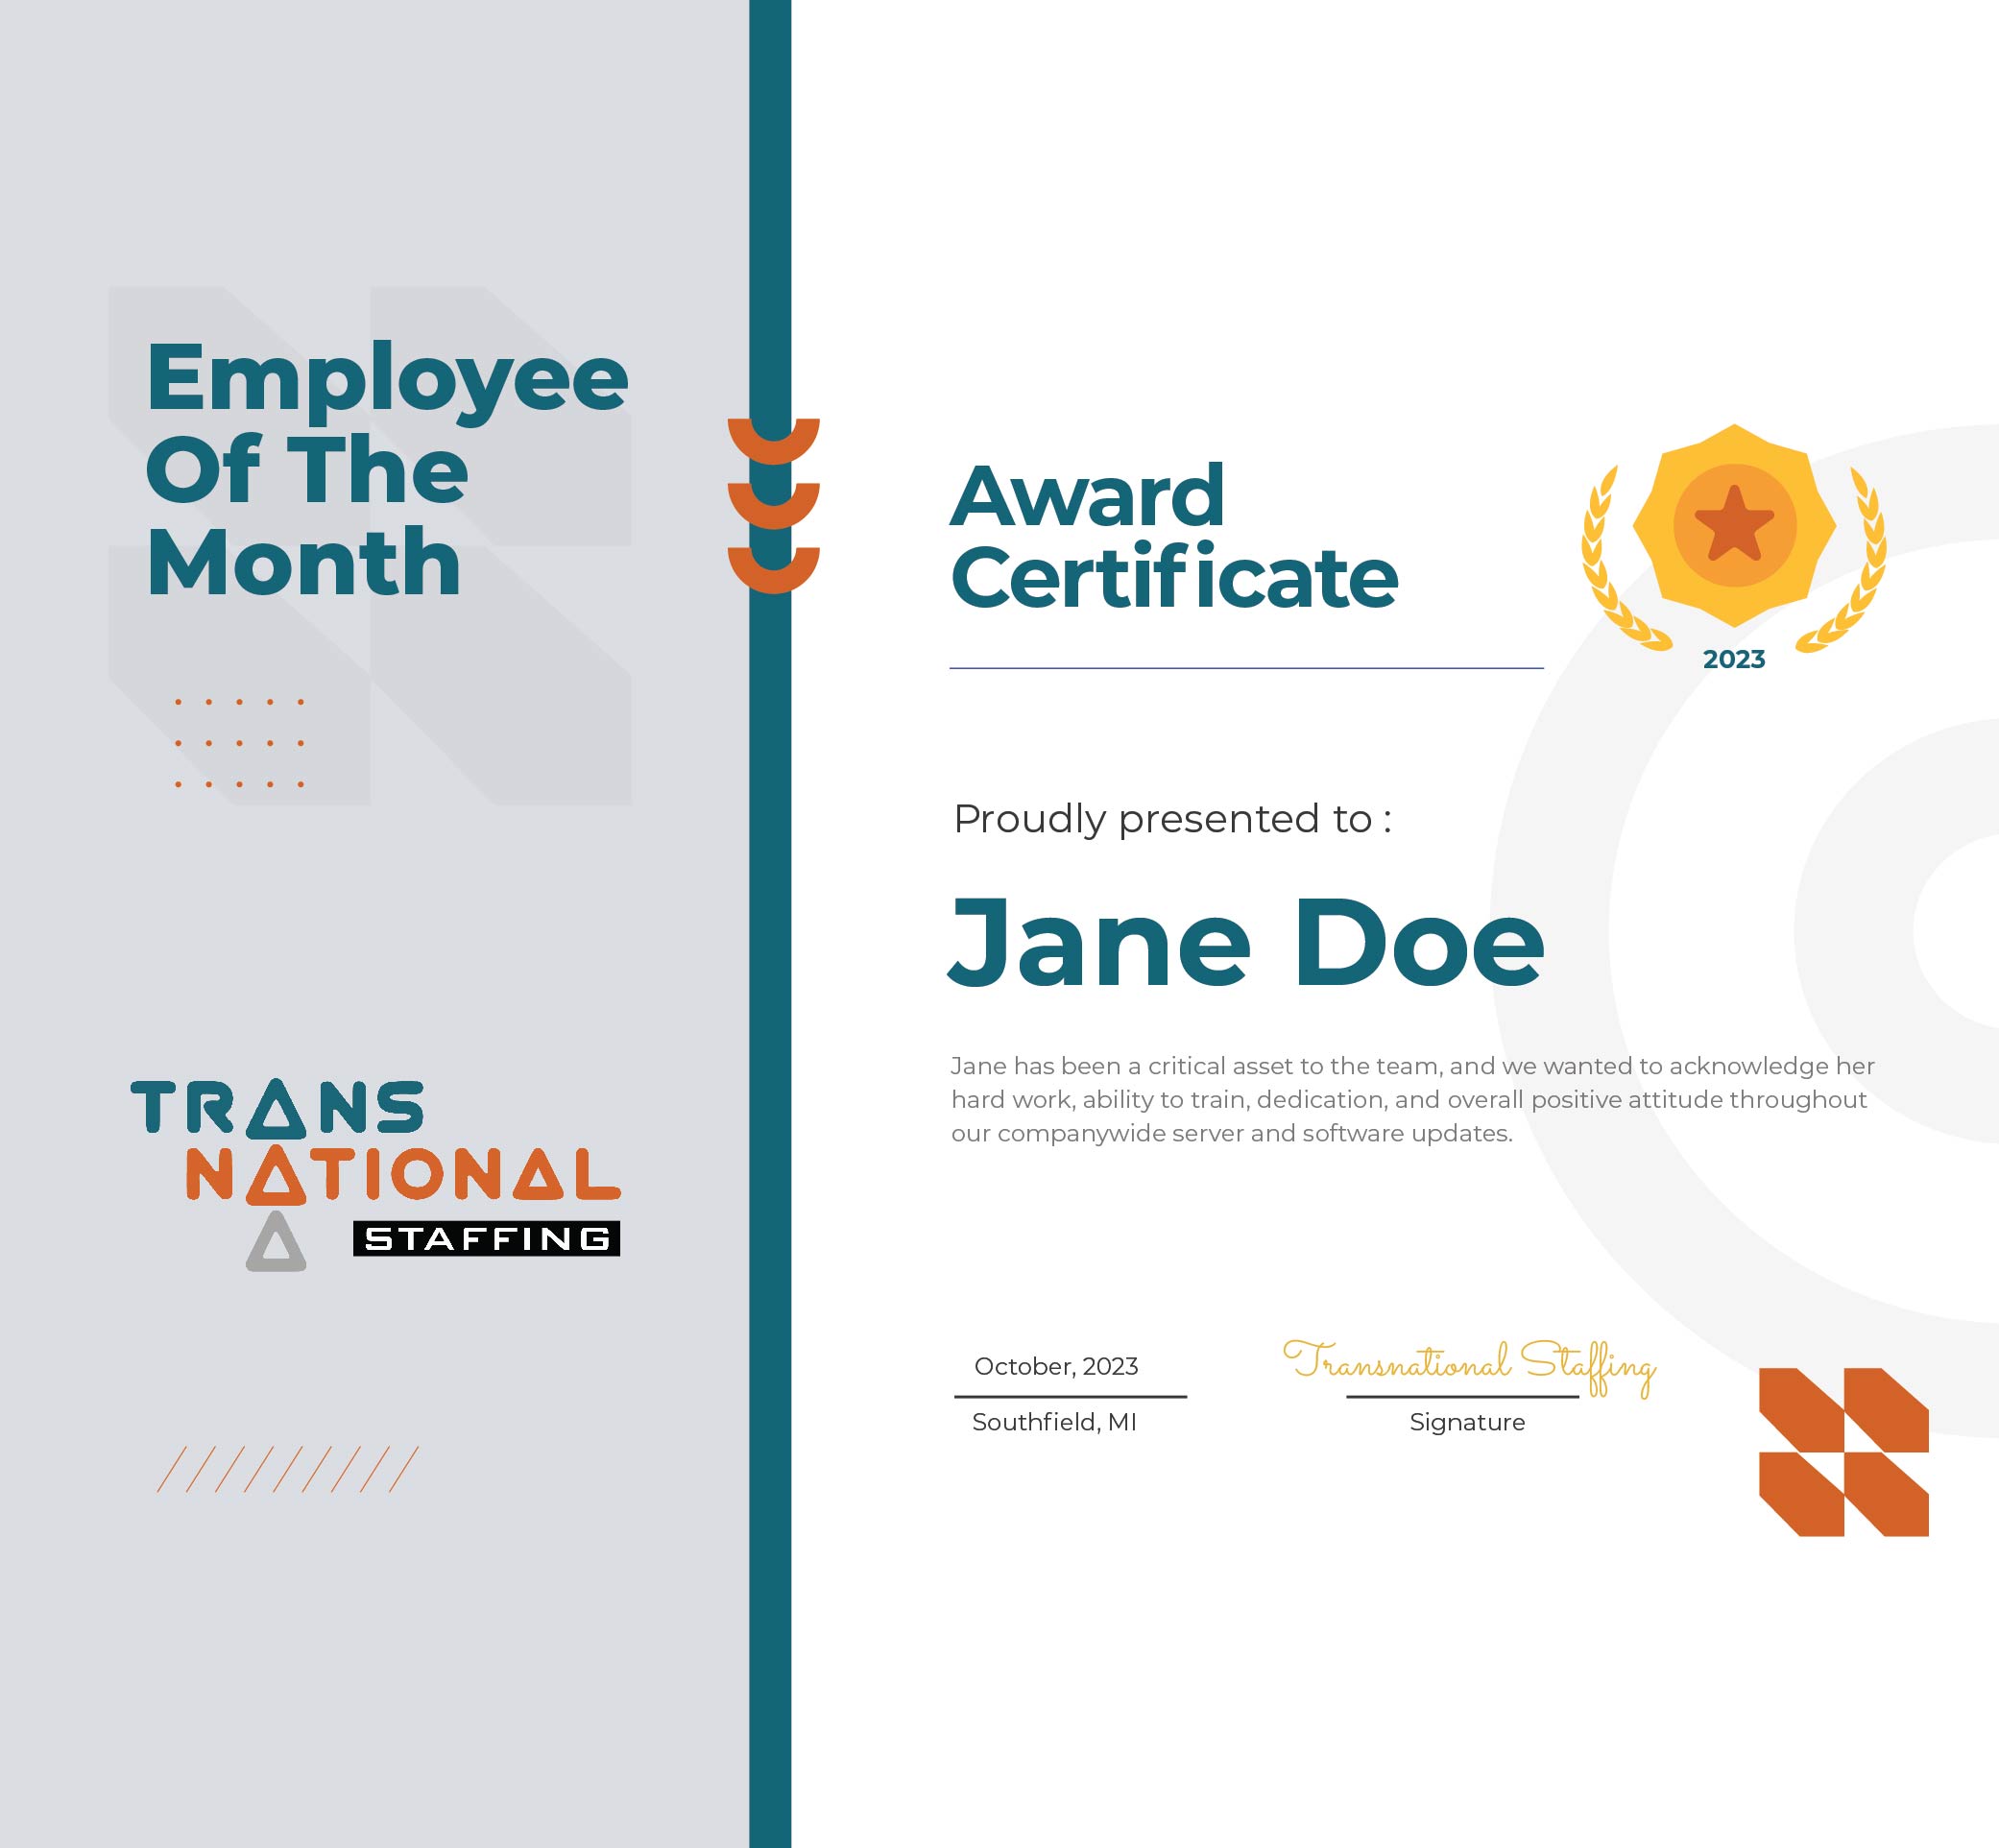 Employee of the month award certificate